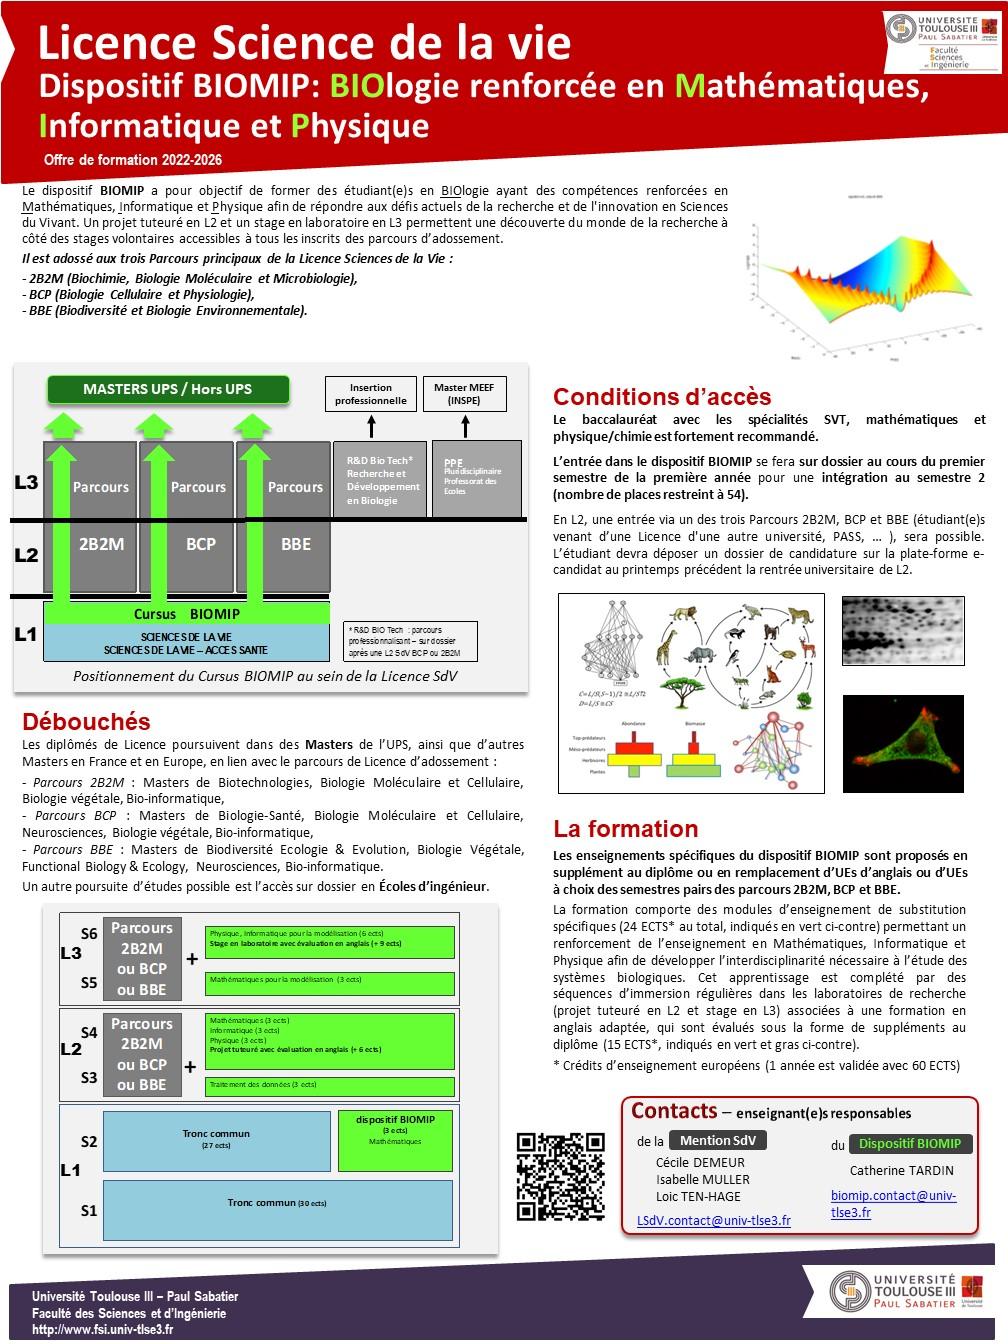 Poster Licence SDV parcours BIOMIP